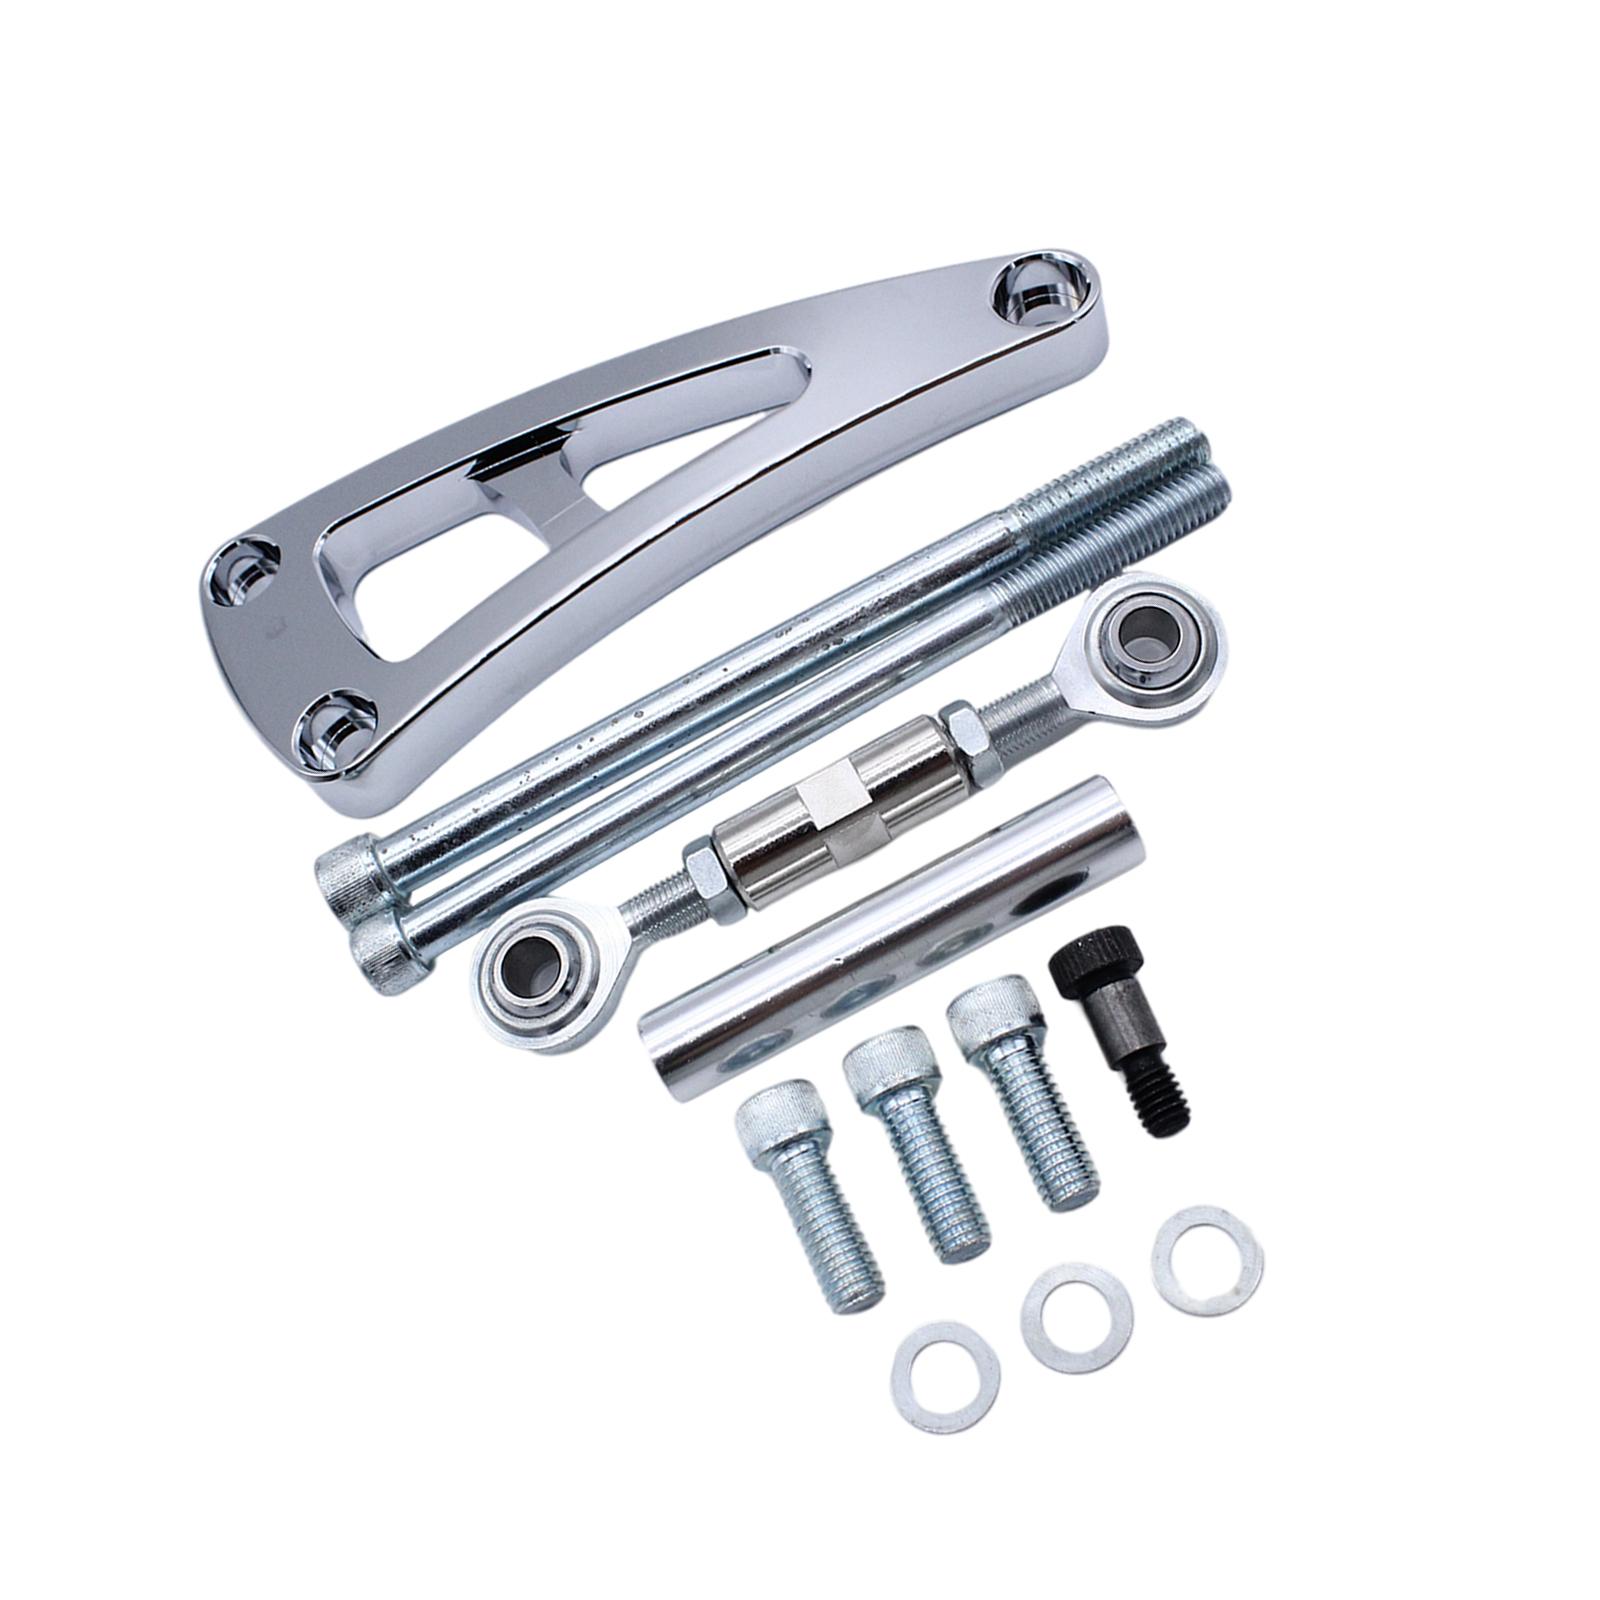 Alternator Bracket Kit with Long Water Pump Replacement Accessories Chrome Automotive Car for Chevy Engine Hz-6423-C